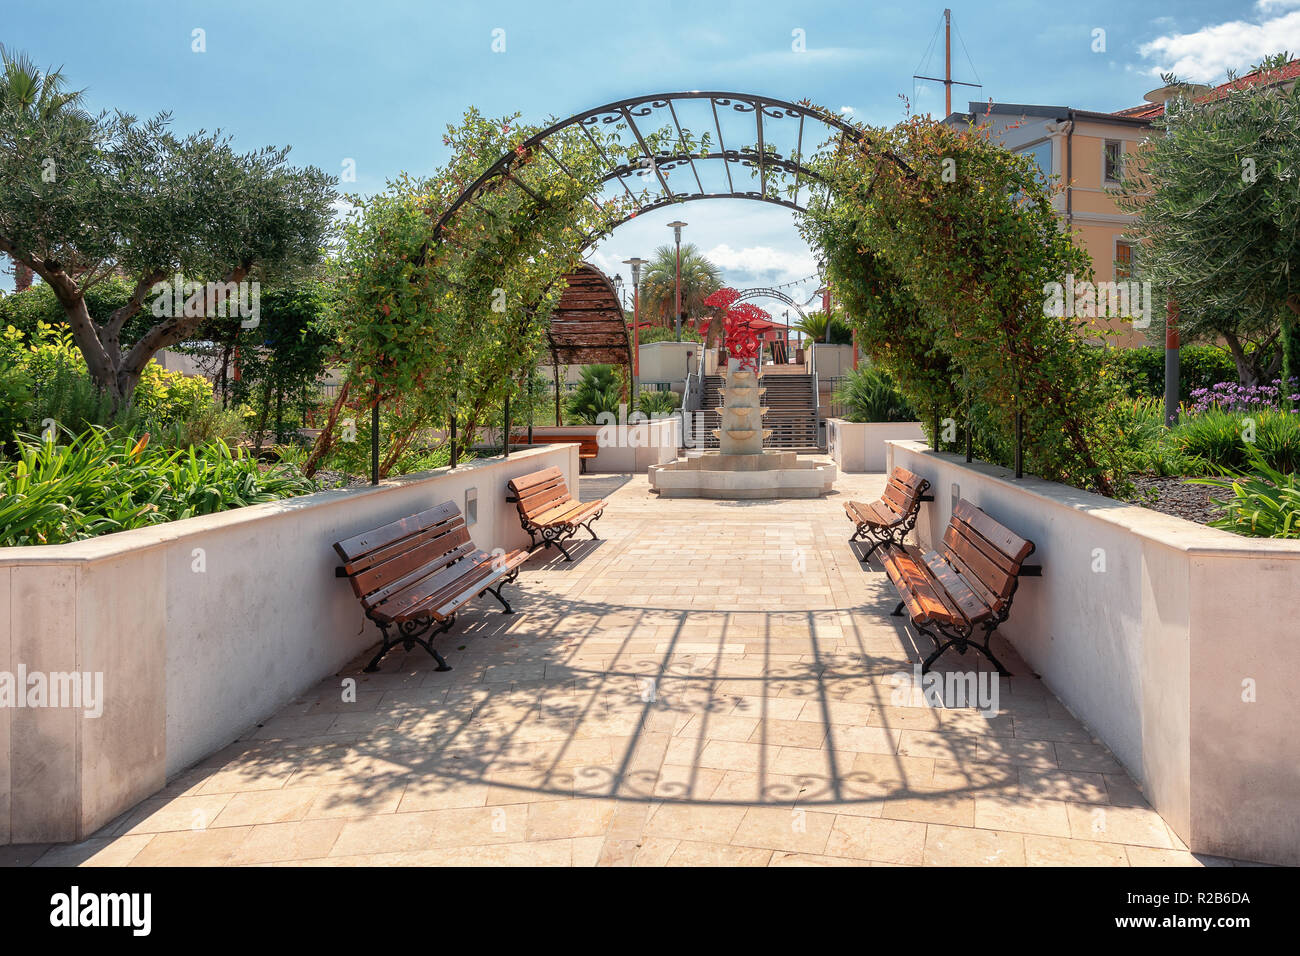 Saint-Jean-Cap-Ferrat, France, September 4, 2018:  Impression of the city garden with fountain decorated with a red piece of modern art of the village Stock Photo